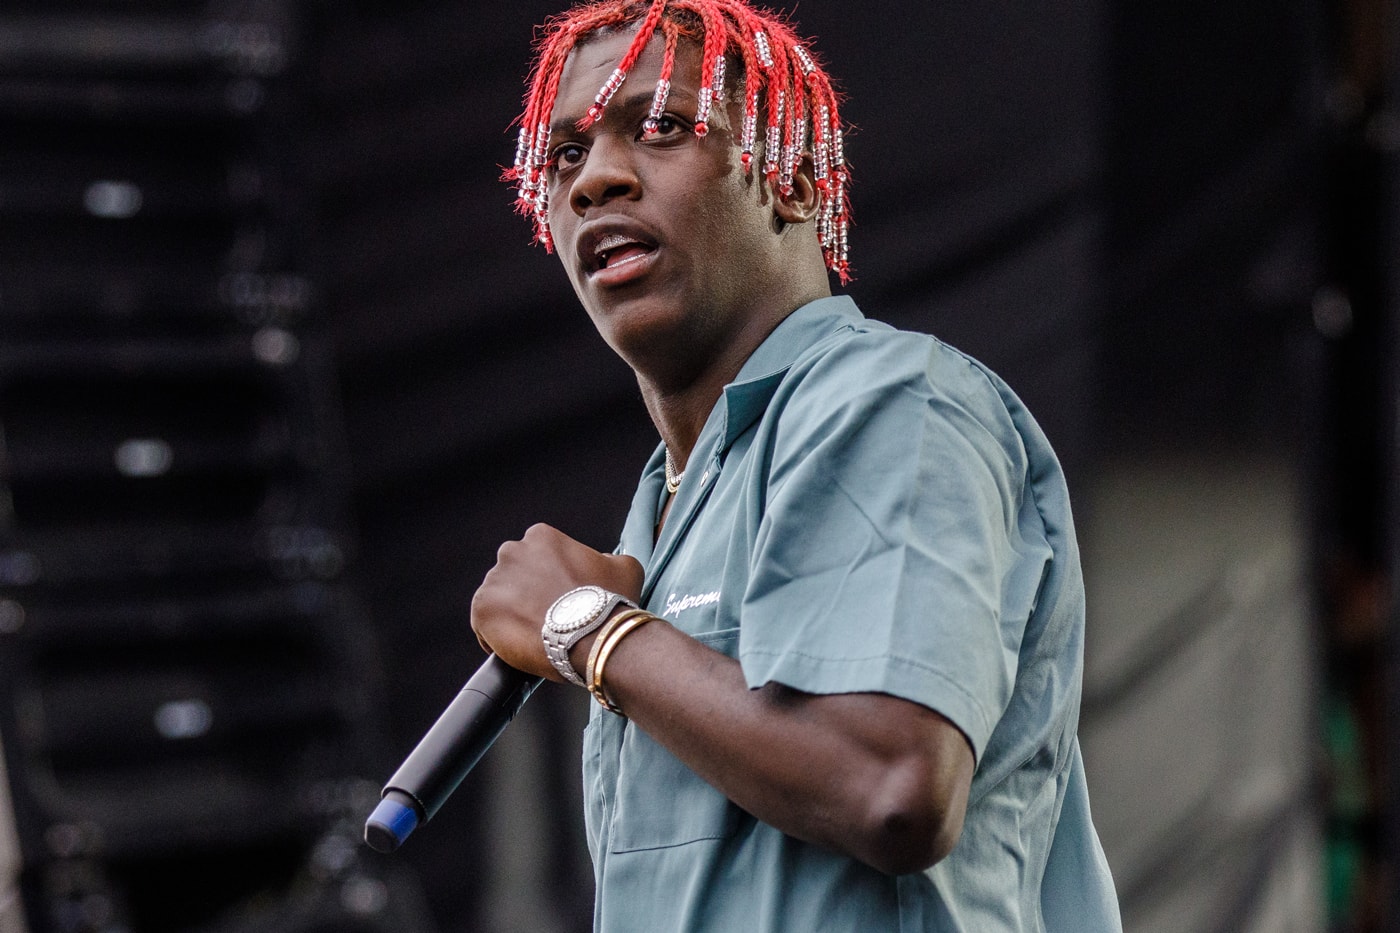 Lil Yachty Trouble Spiffy Global Private